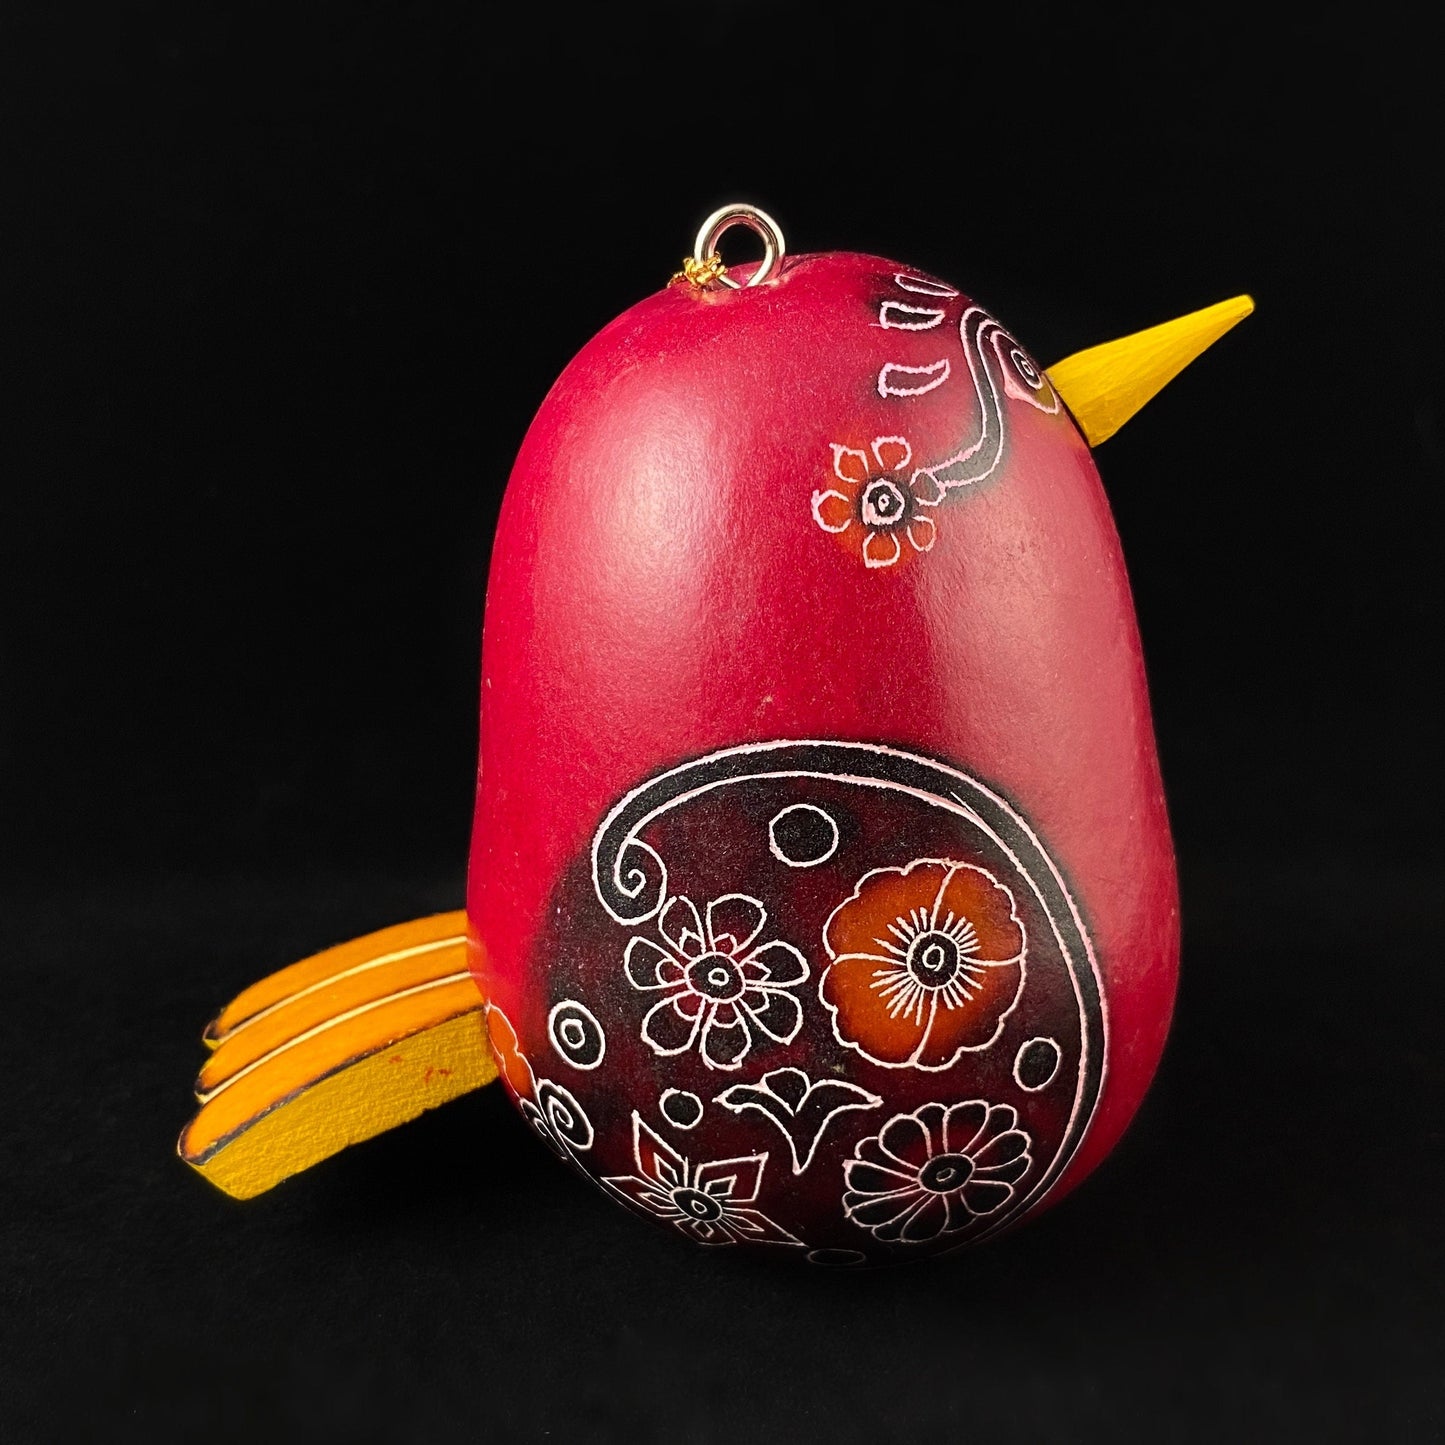 Decorative Red Bird Ornament/Maraca - Hand-Carved and Hand Painted Peruvian Gourd